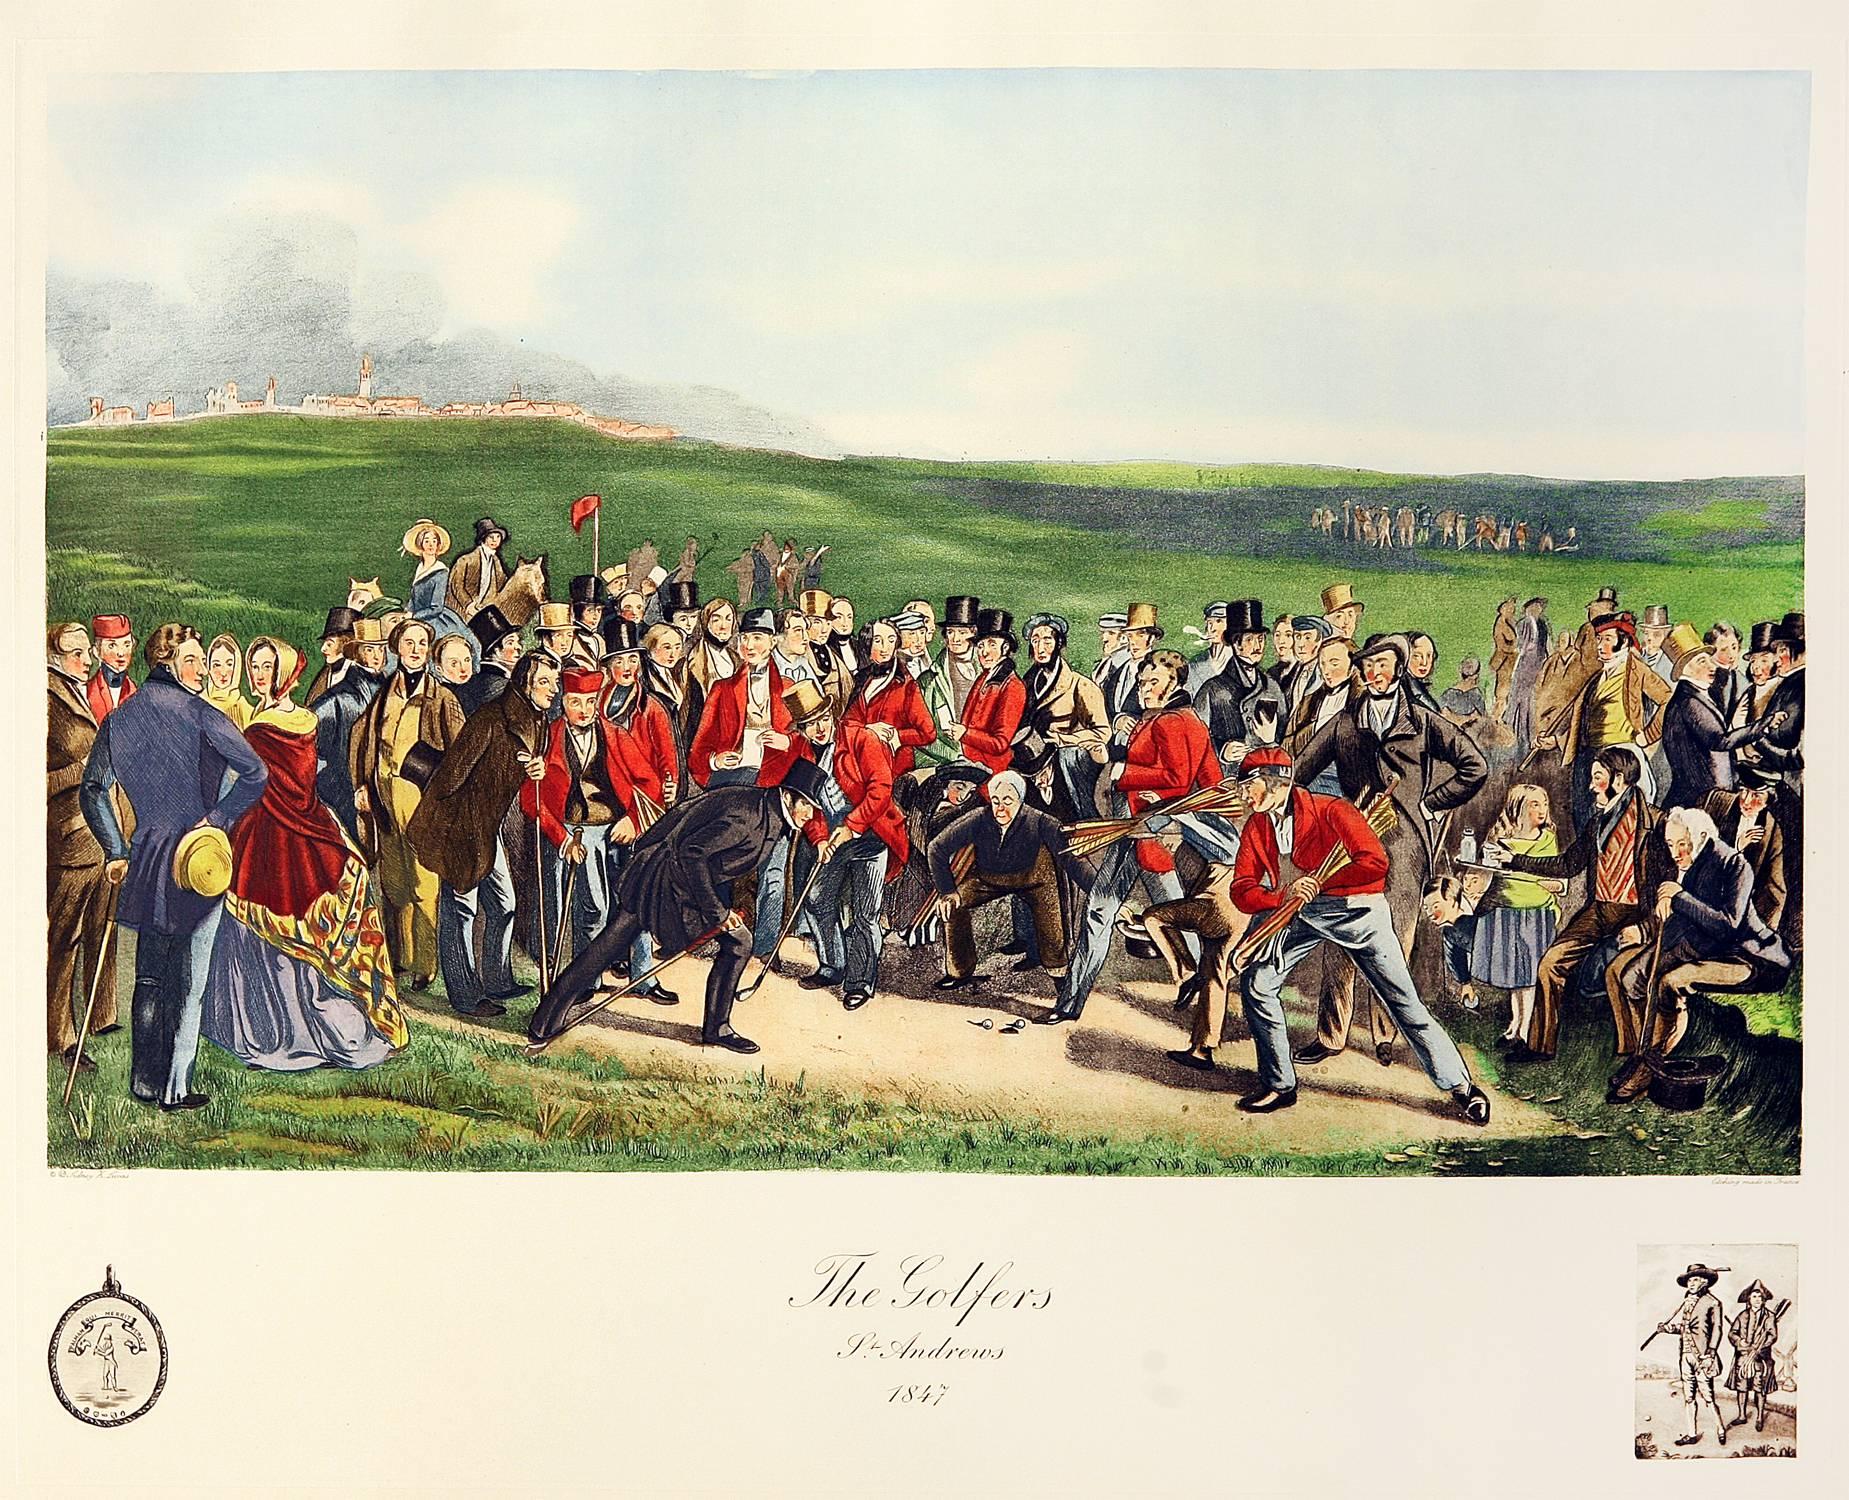 Charles Lees Landscape Print - Early Golf Tournament at St. Andrews, Scotland